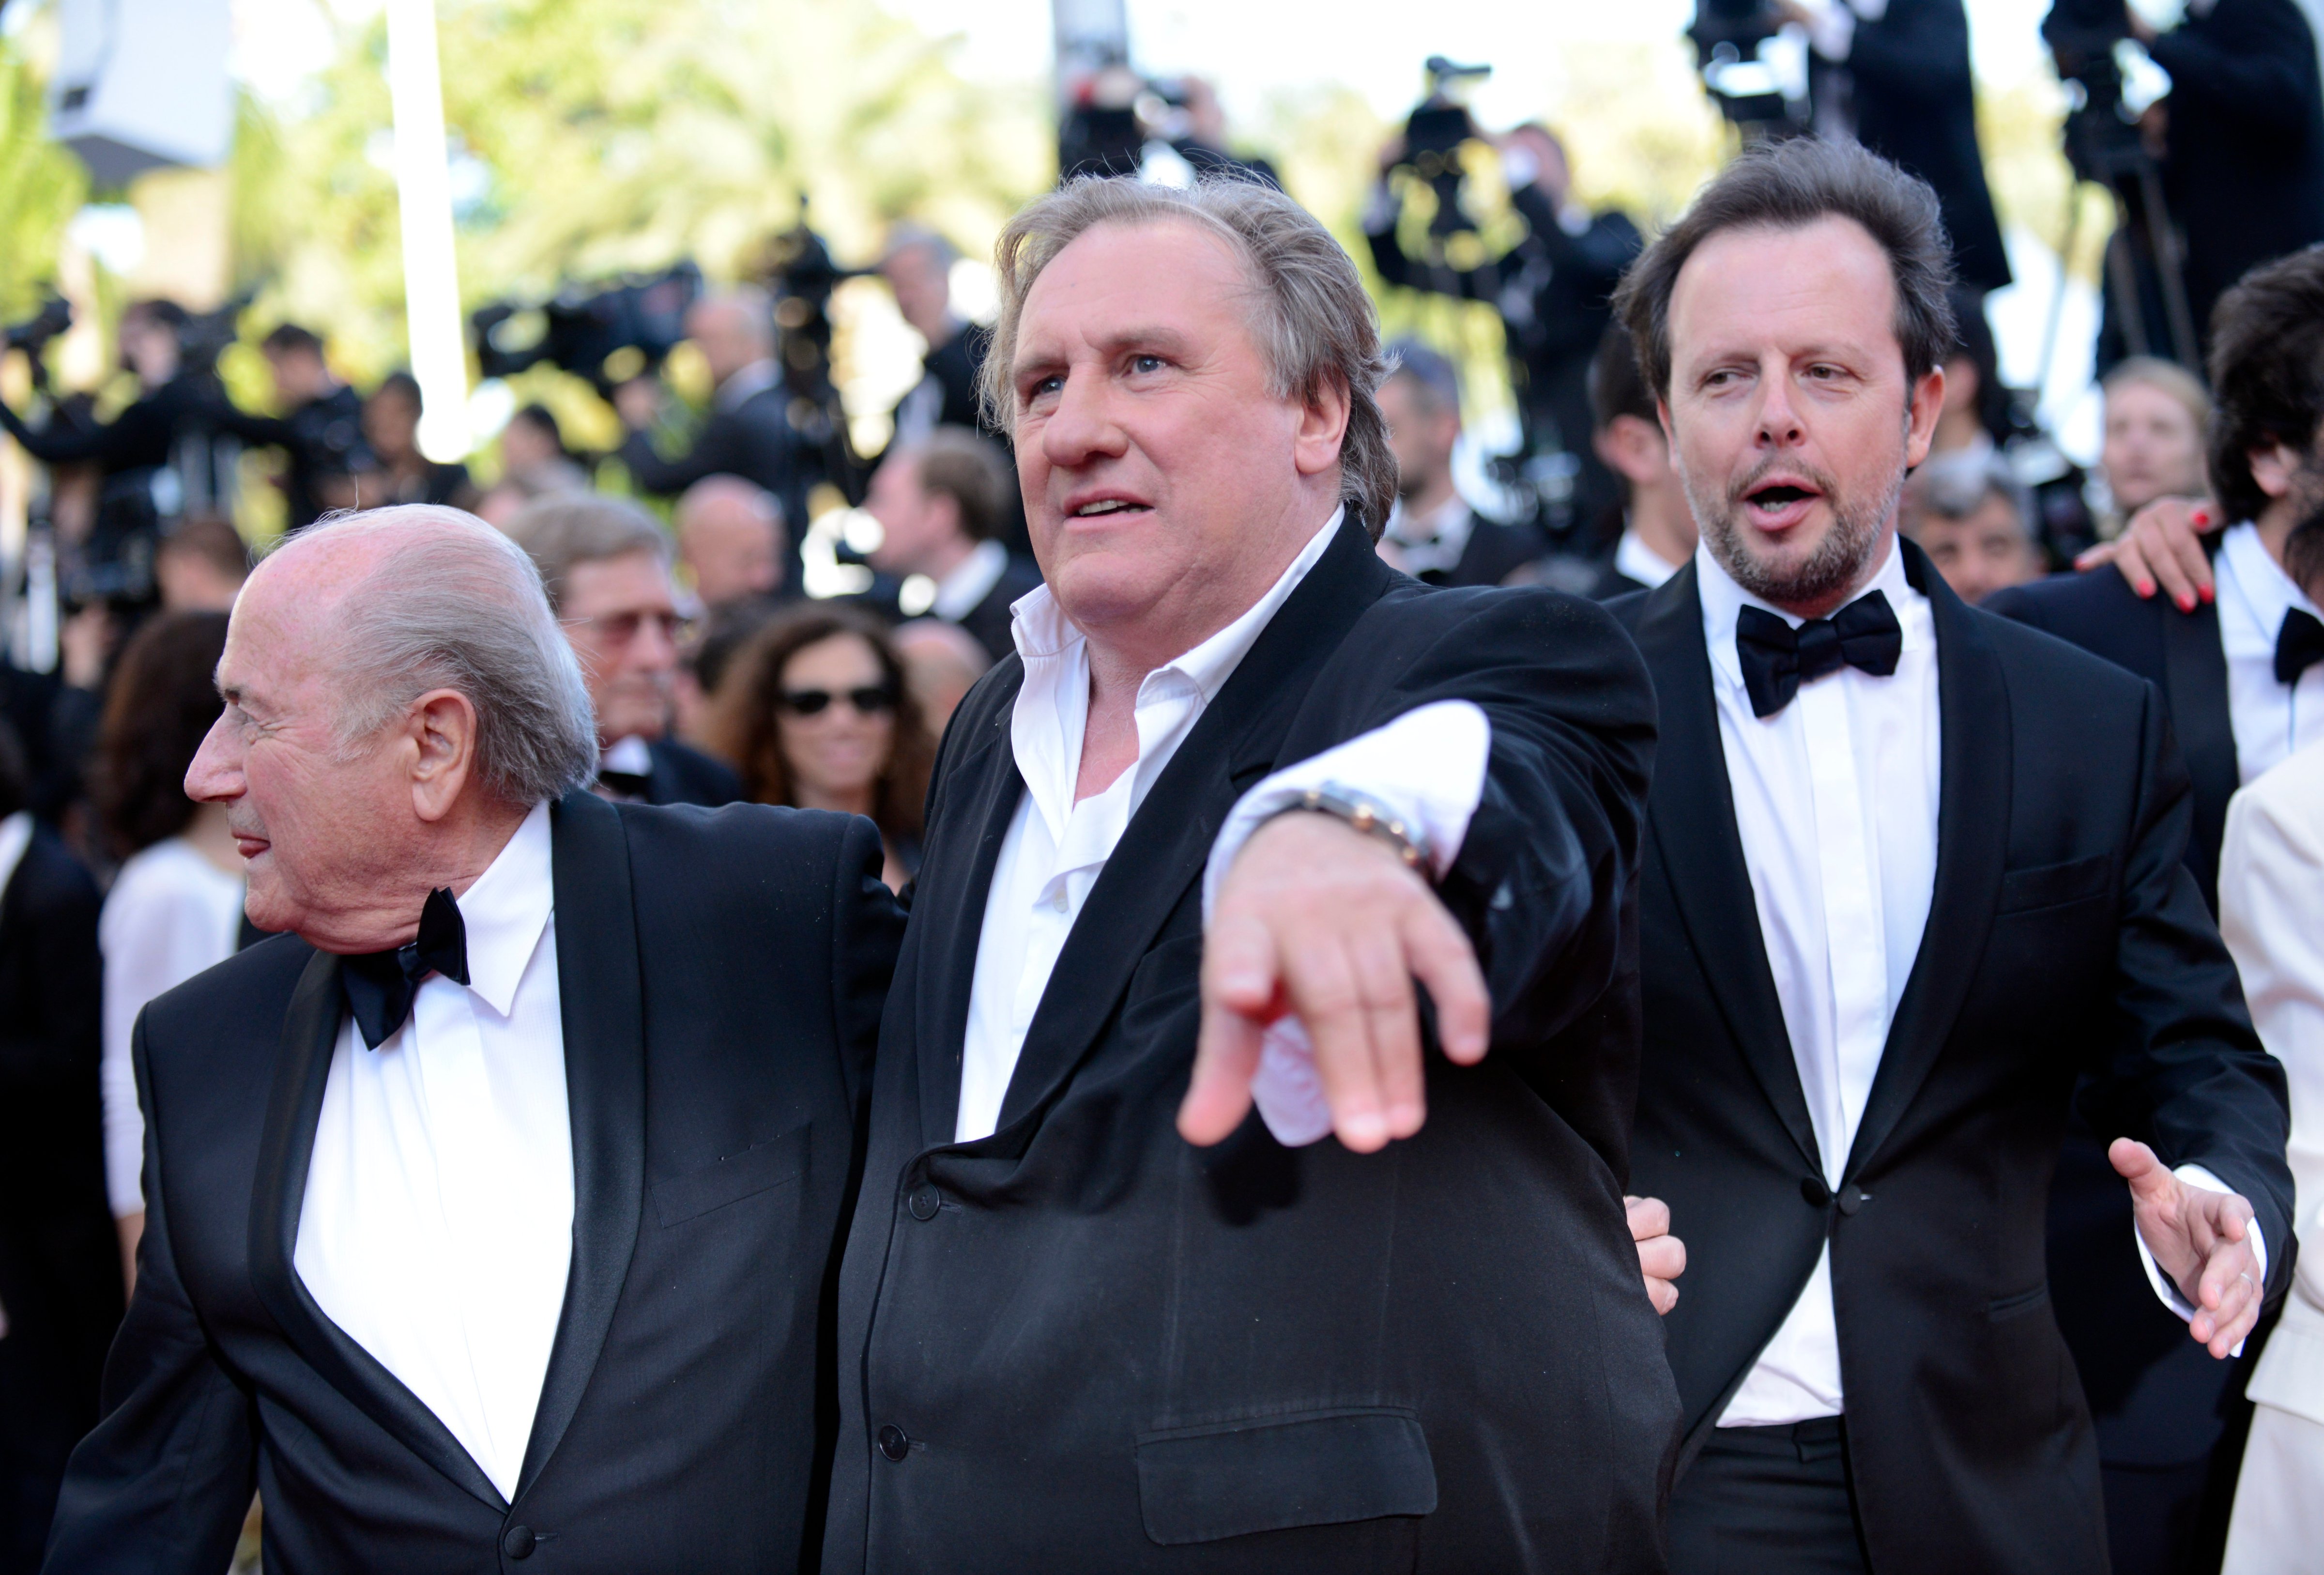 FIFA President Sepp Blatter, Gerard Depardieu and Frederic Auburtin arrive for the screening of The Homesman at the 67th international film festival, Cannes, southern France, May 18, 2014. (Arthur Mola — Invision/AP)